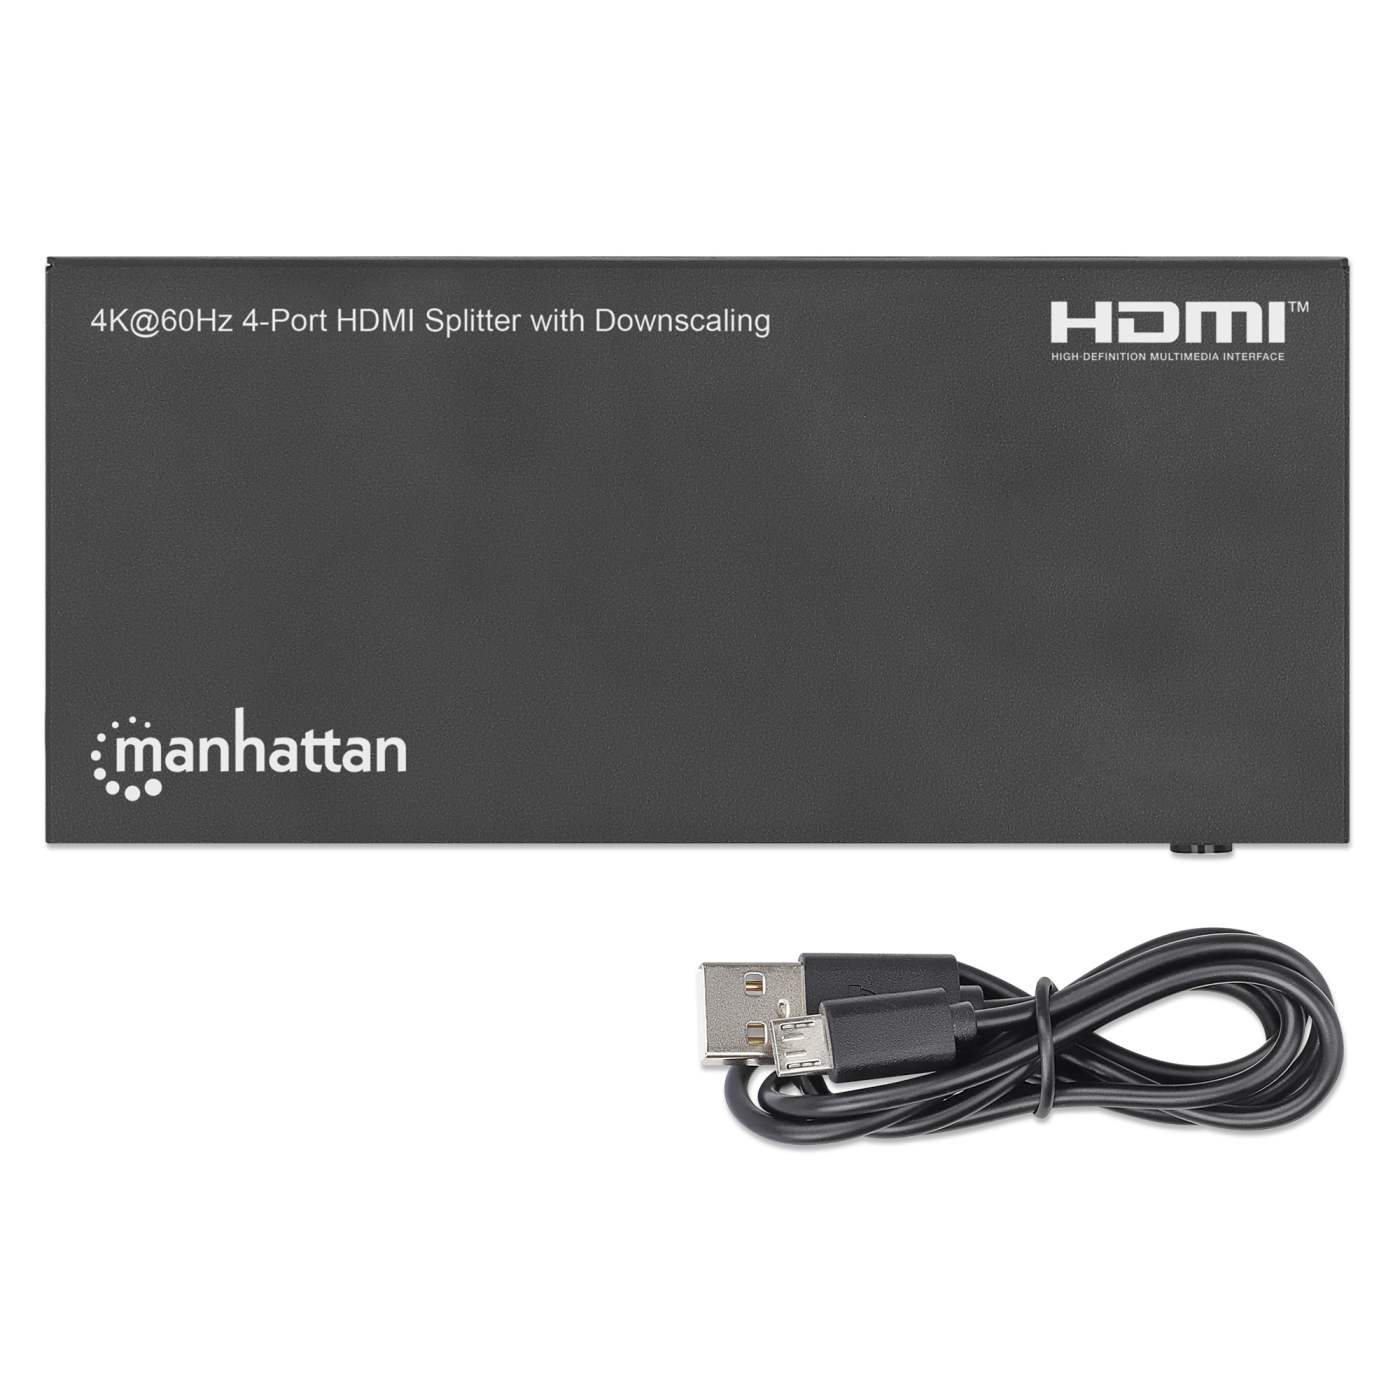 4K@60Hz 4-Port HDMI Splitter with Downscaling Image 7